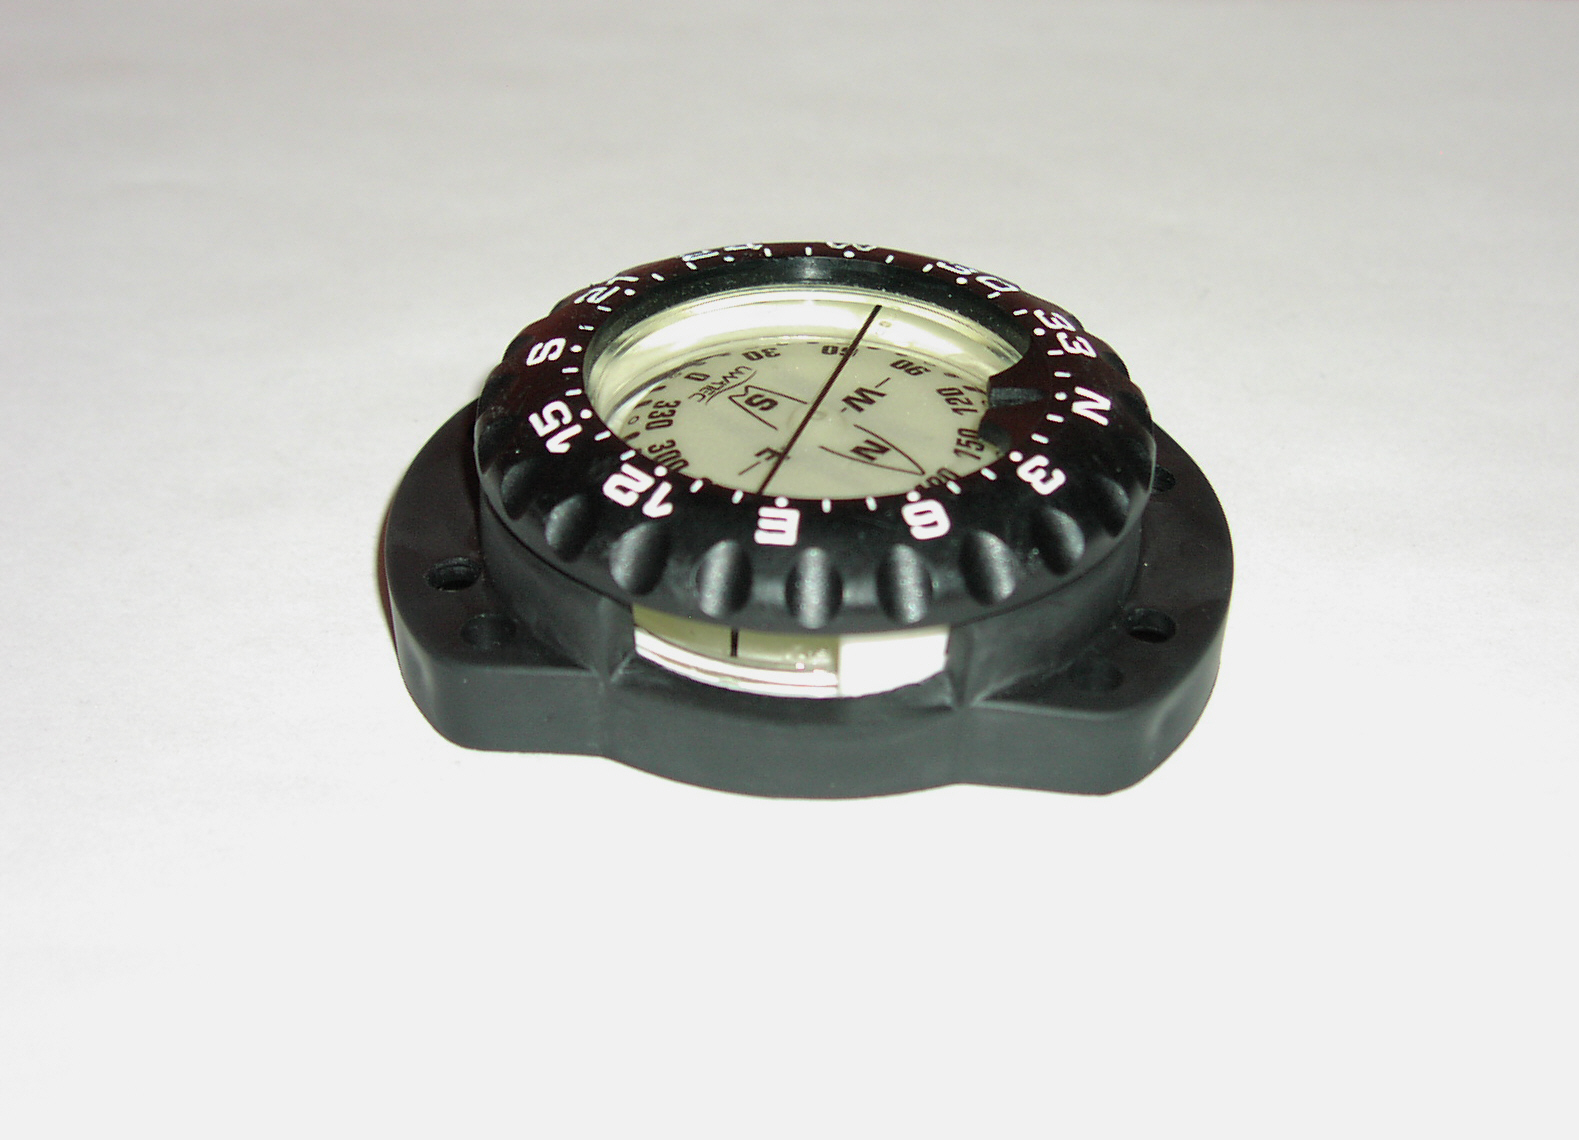 Uwatec  FS-1  Compass Bungee Ready Mount